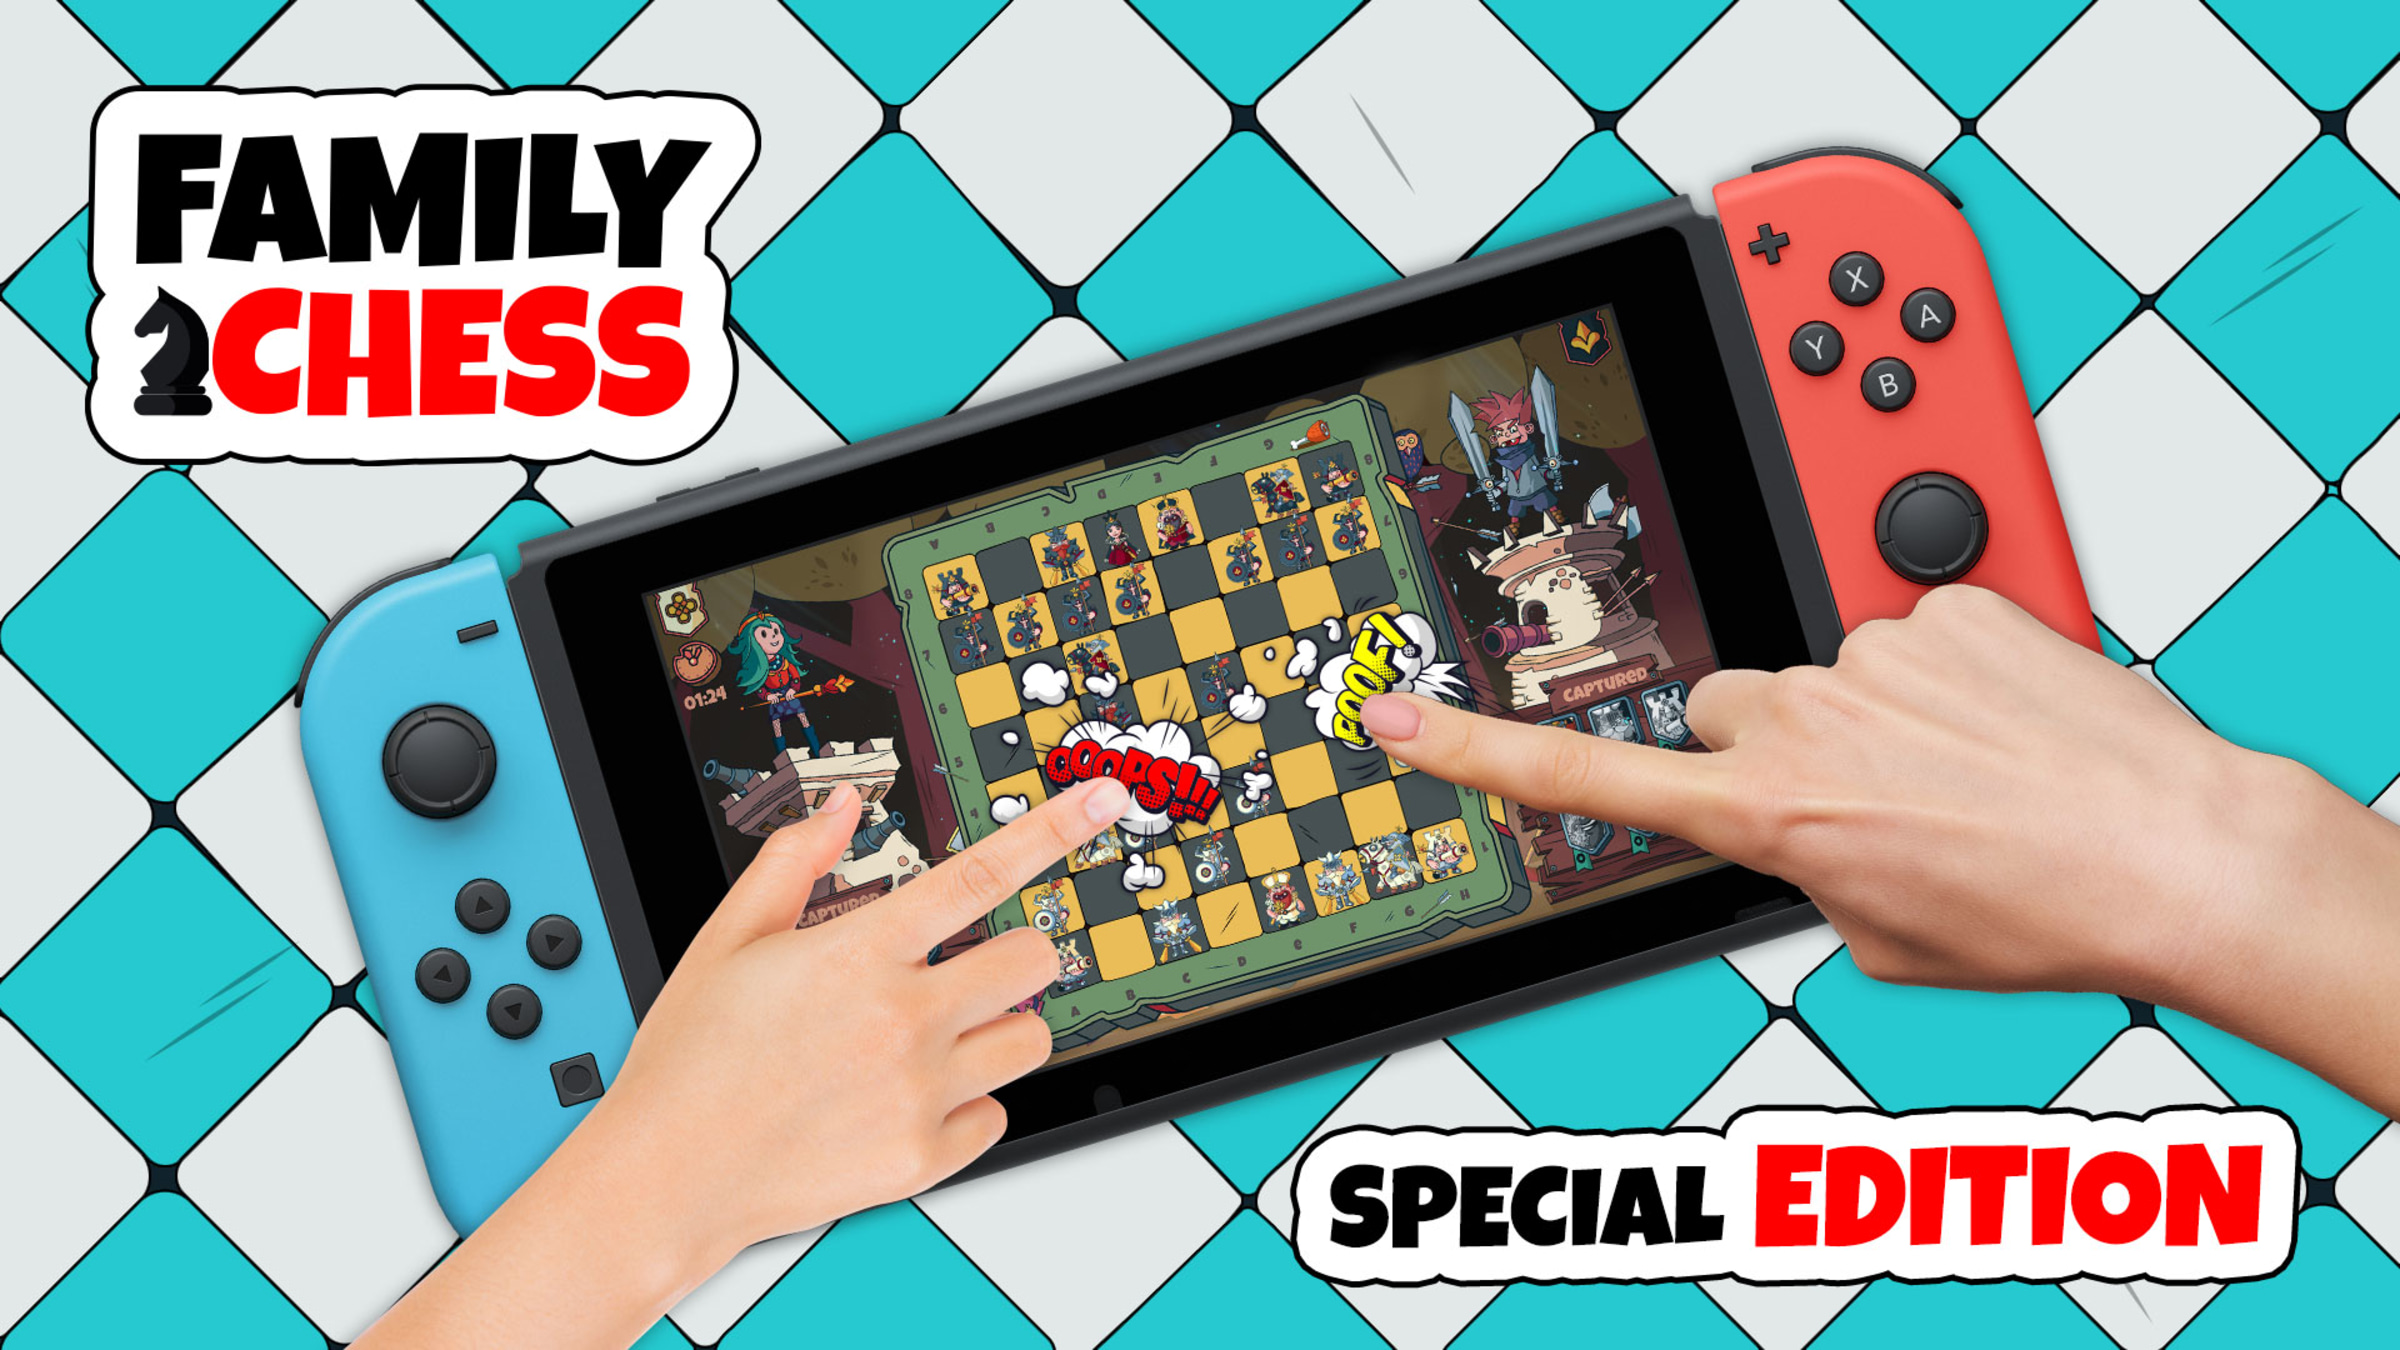 Puzzle & Chess for Nintendo Switch - Nintendo Official Site